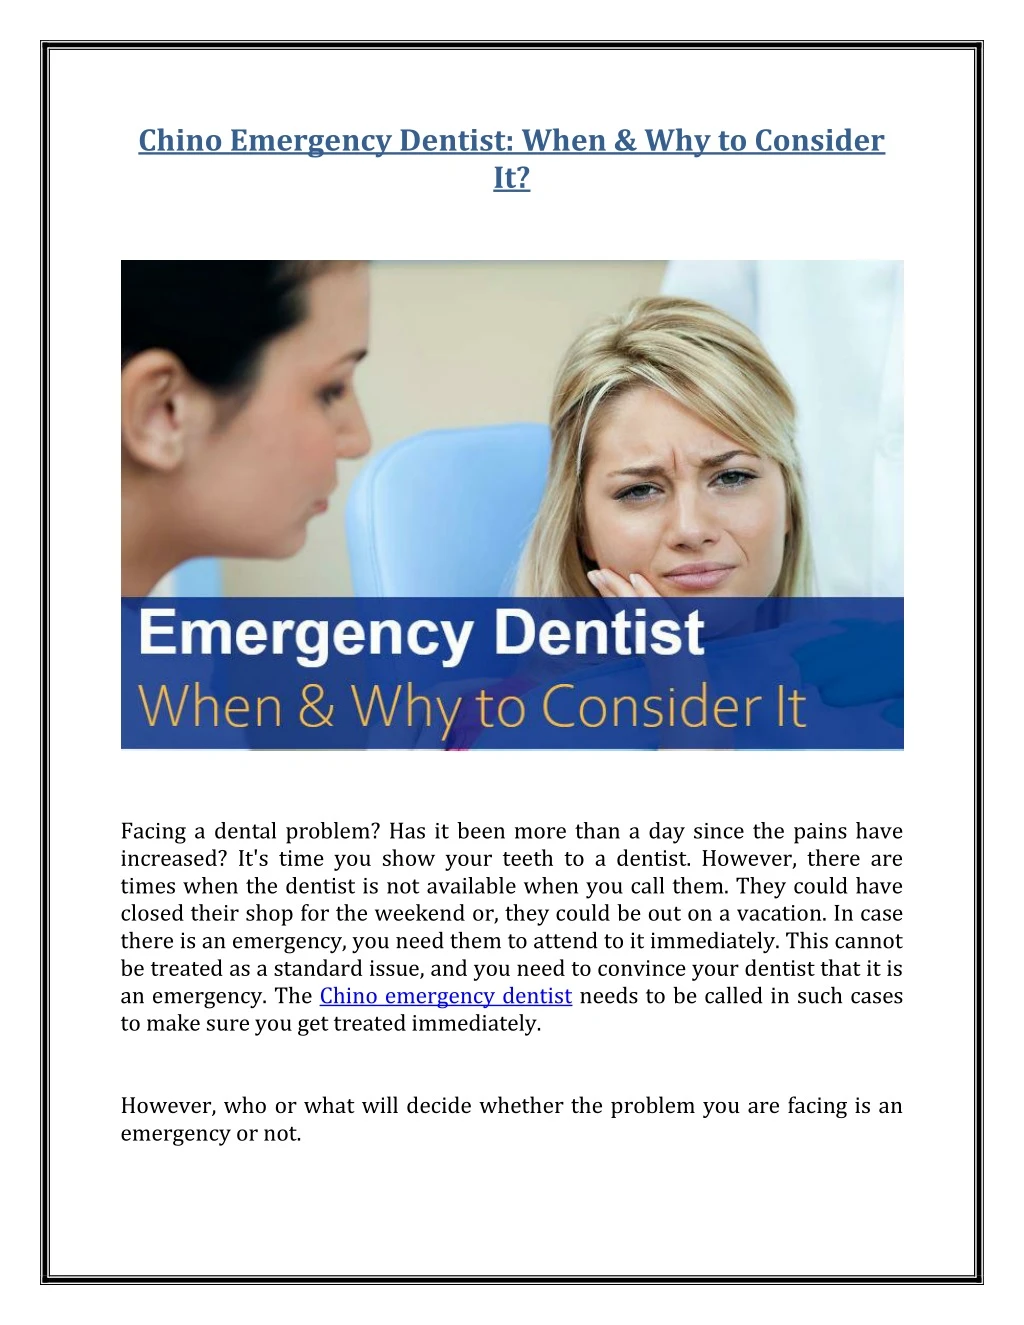 chino emergency dentist when why to consider it